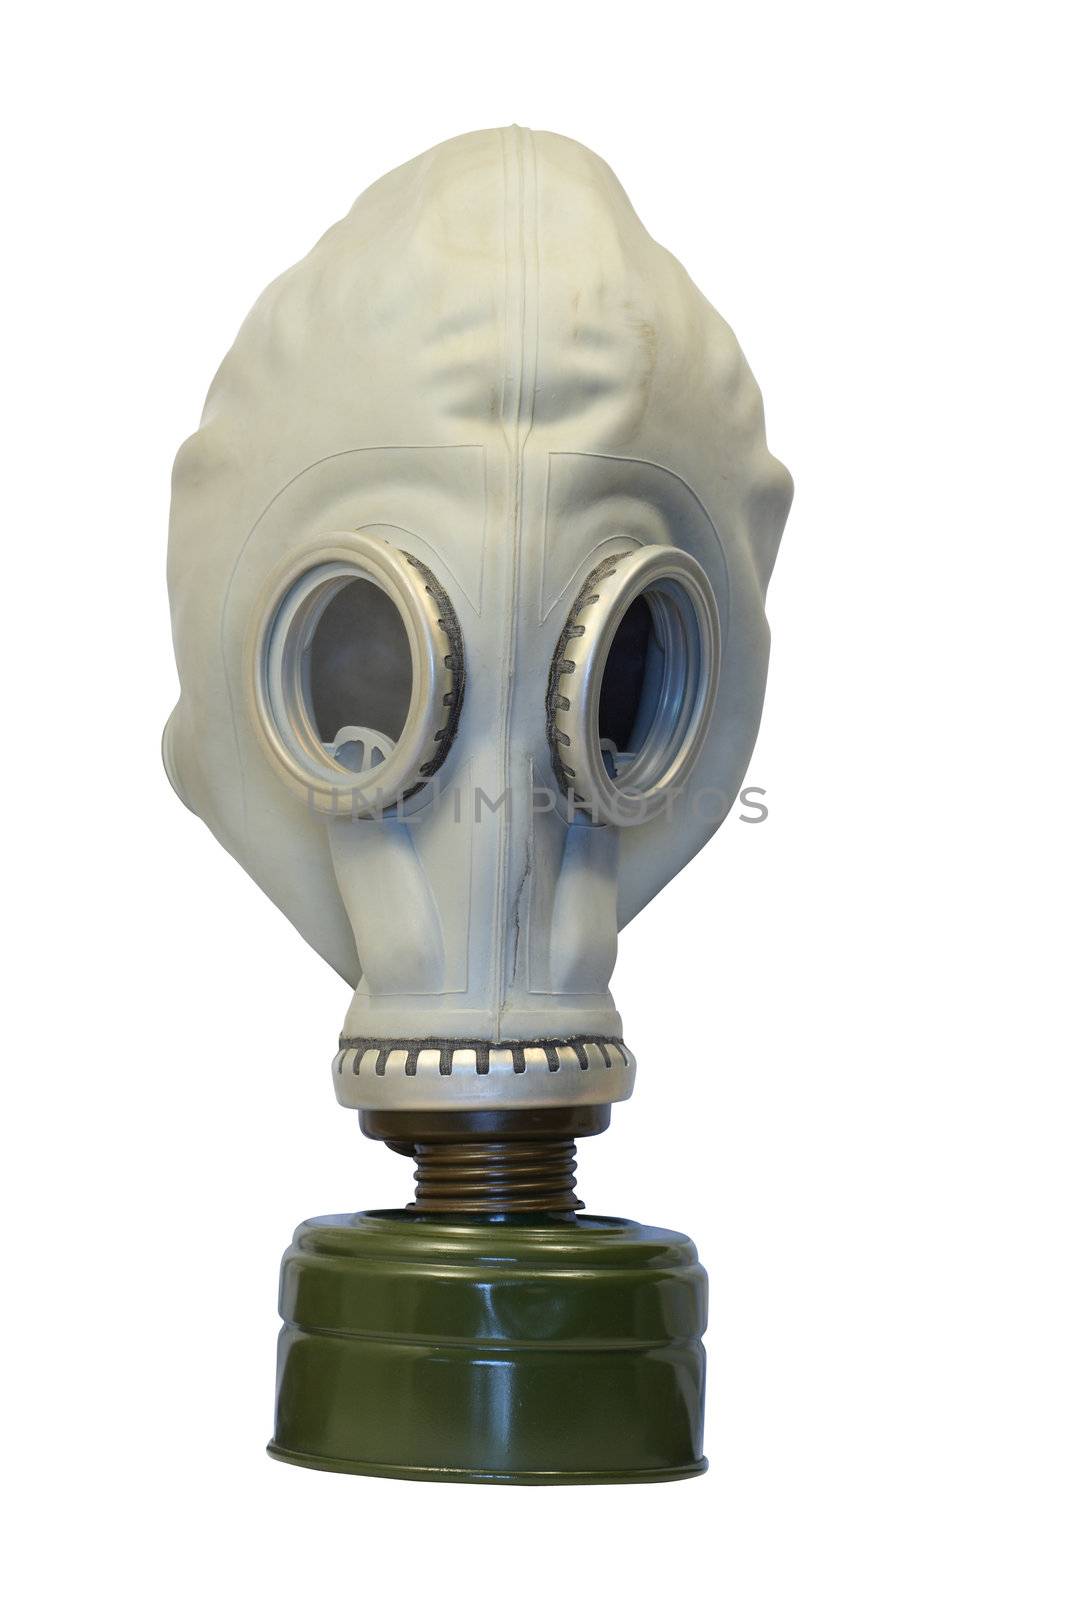 Old military gas mask isolated on white background with clipping path